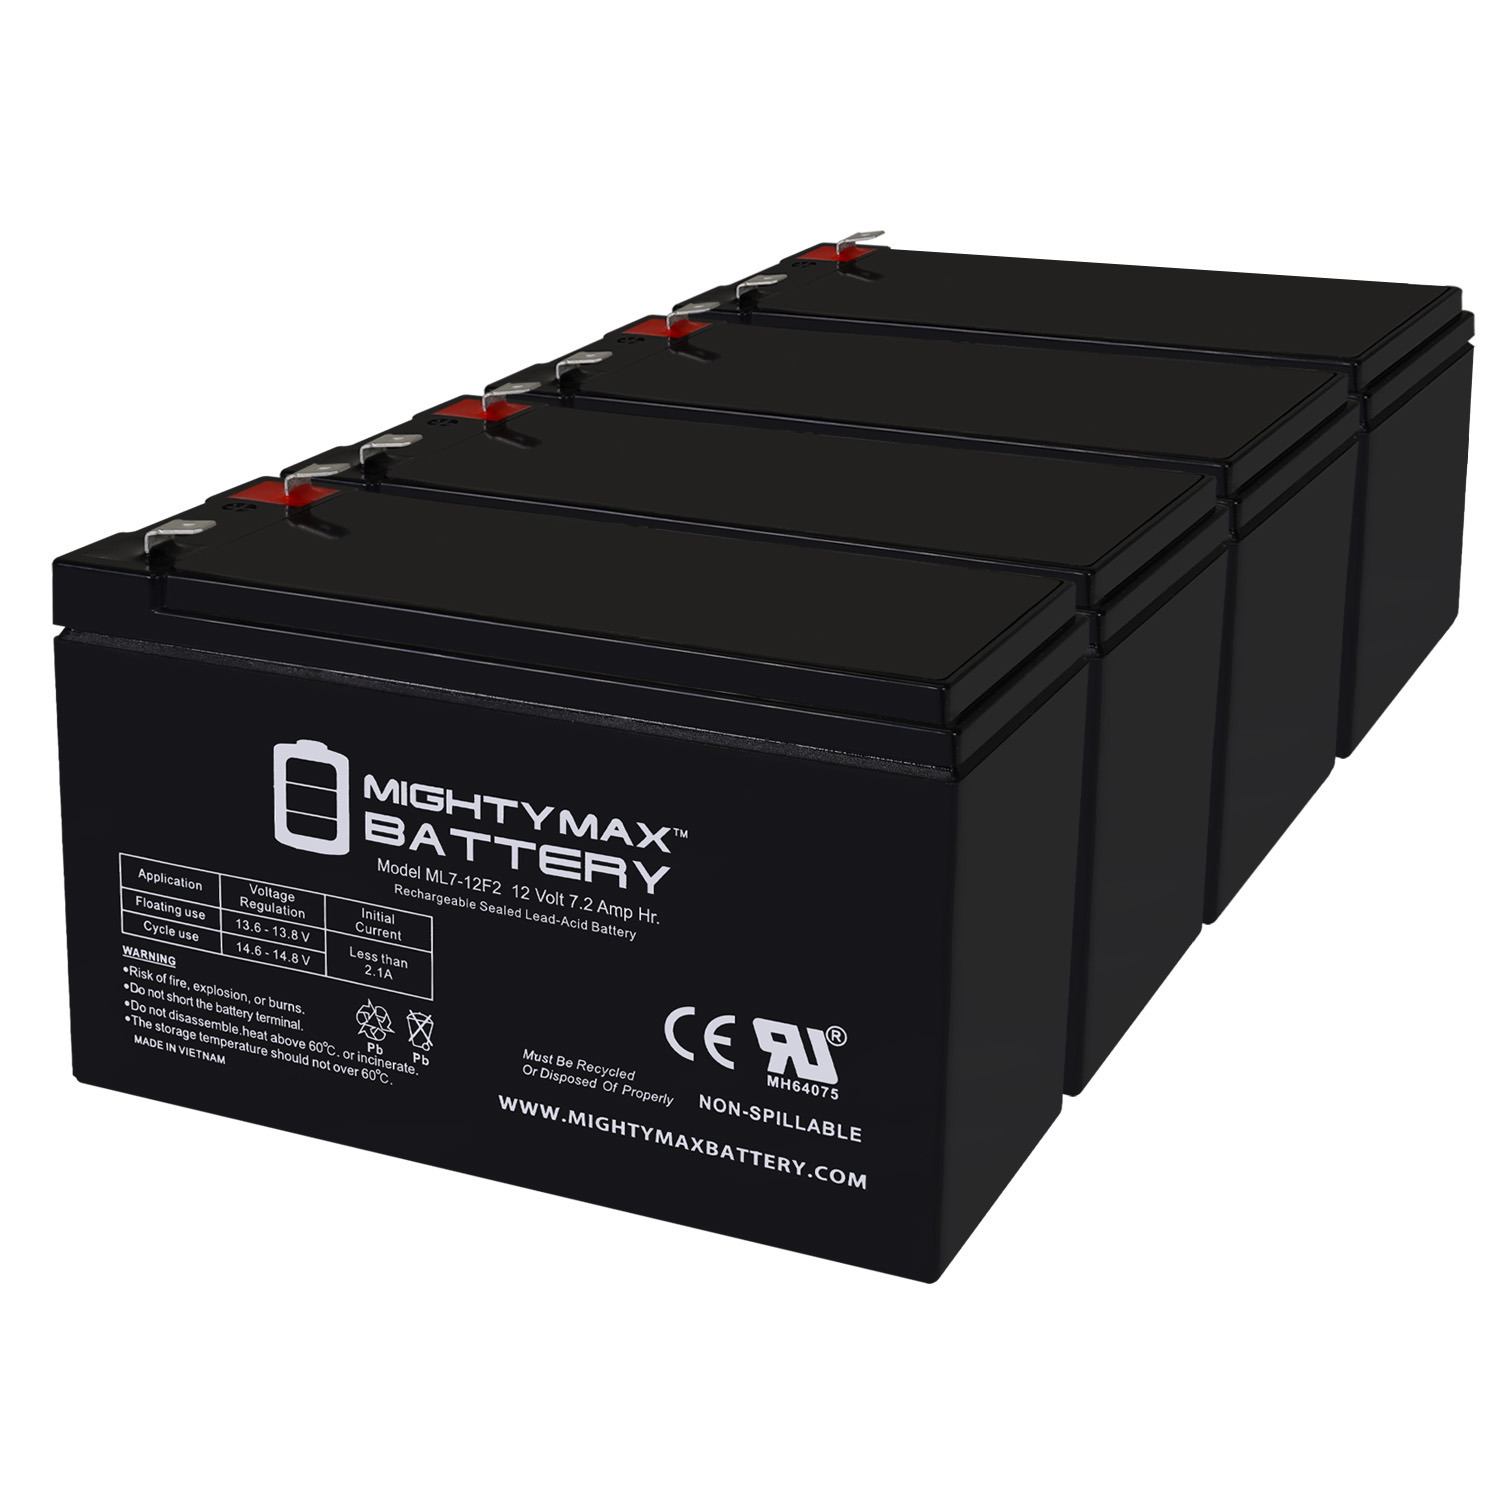 12V 7Ah F2 Replacement Battery for Rastar Land Rover Evoque - 4 Pack